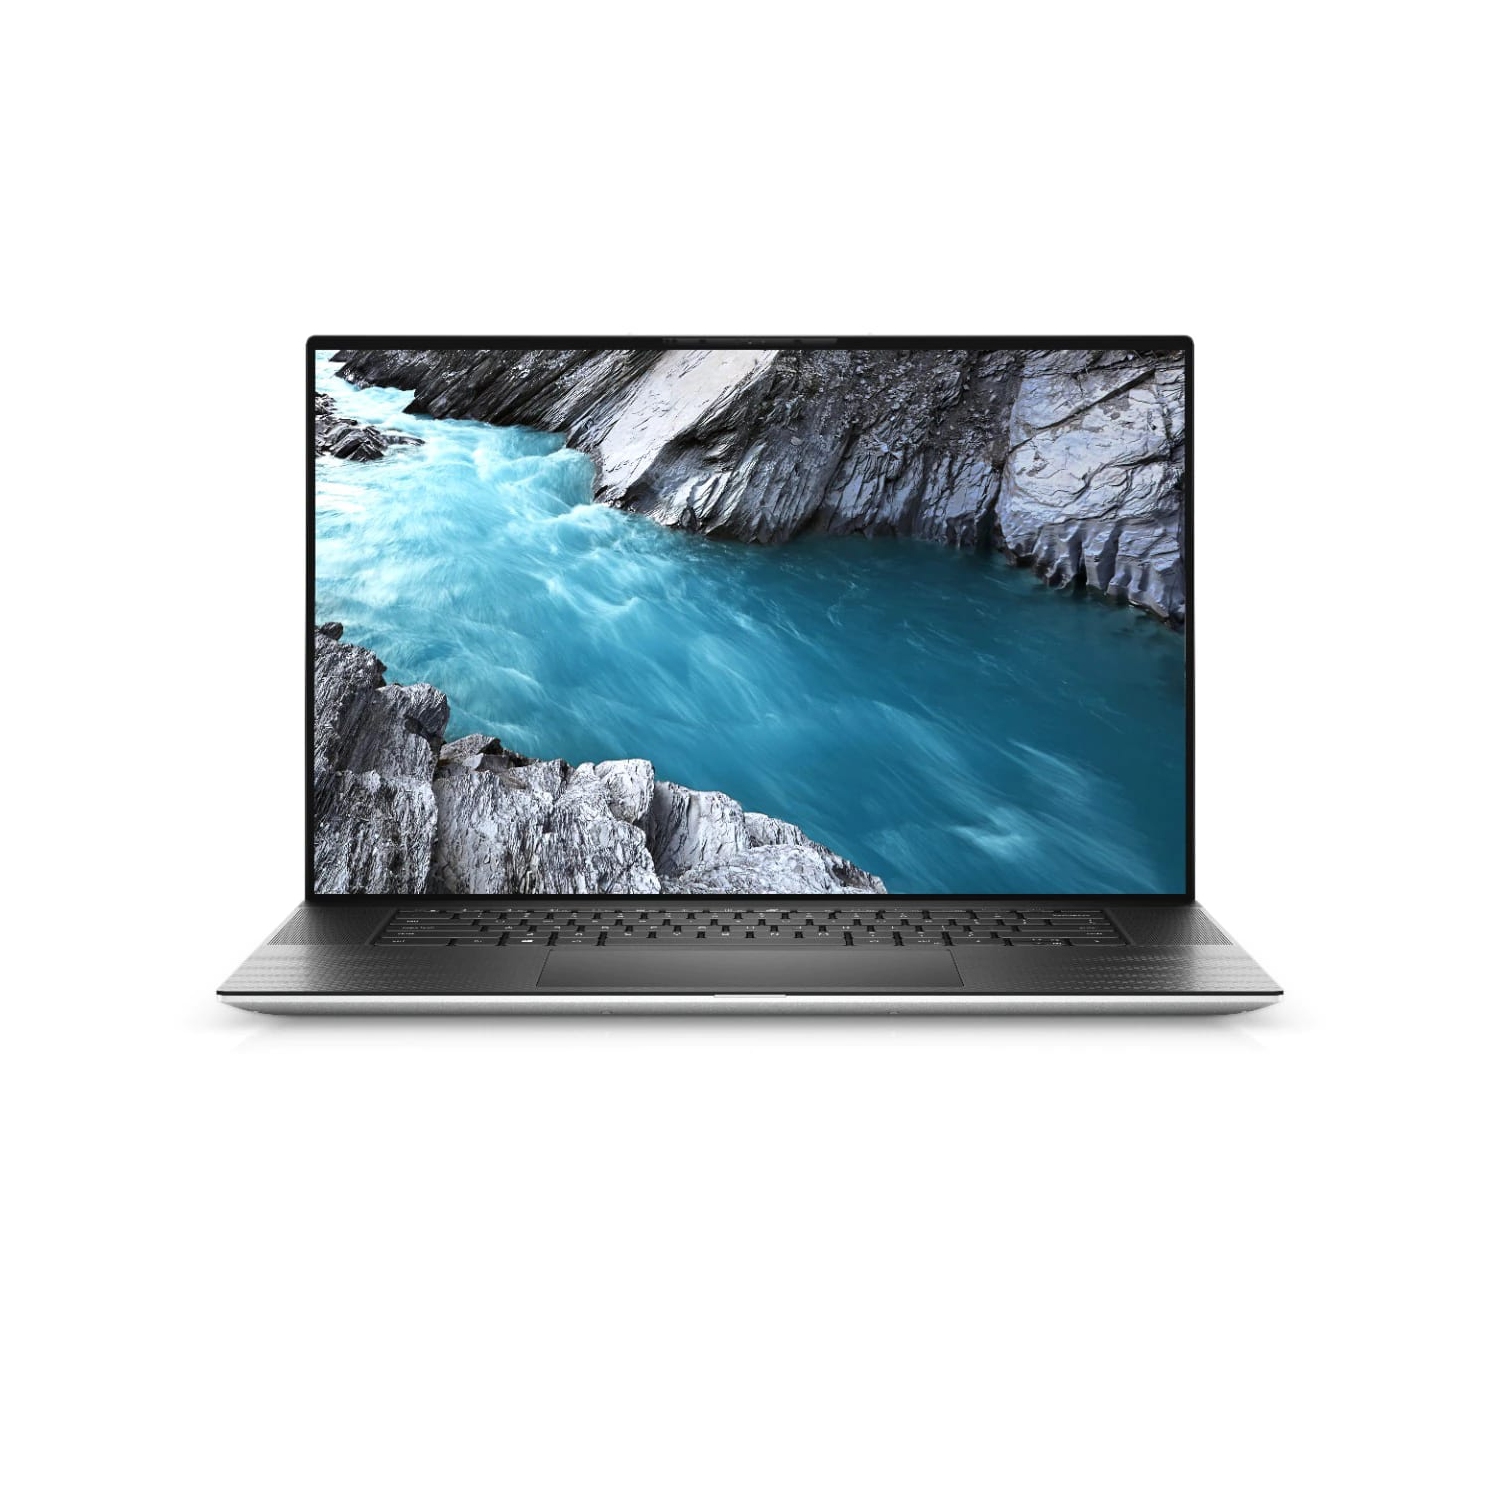 Refurbished (Excellent) - Dell XPS 17 9700 Laptop (2020) | 17" 4K Touch | Core i7 - 2TB SSD - 32GB RAM - RTX 2060 | 8 Cores @ 5.1 GHz - 10th Gen CPU Certified Refurbished